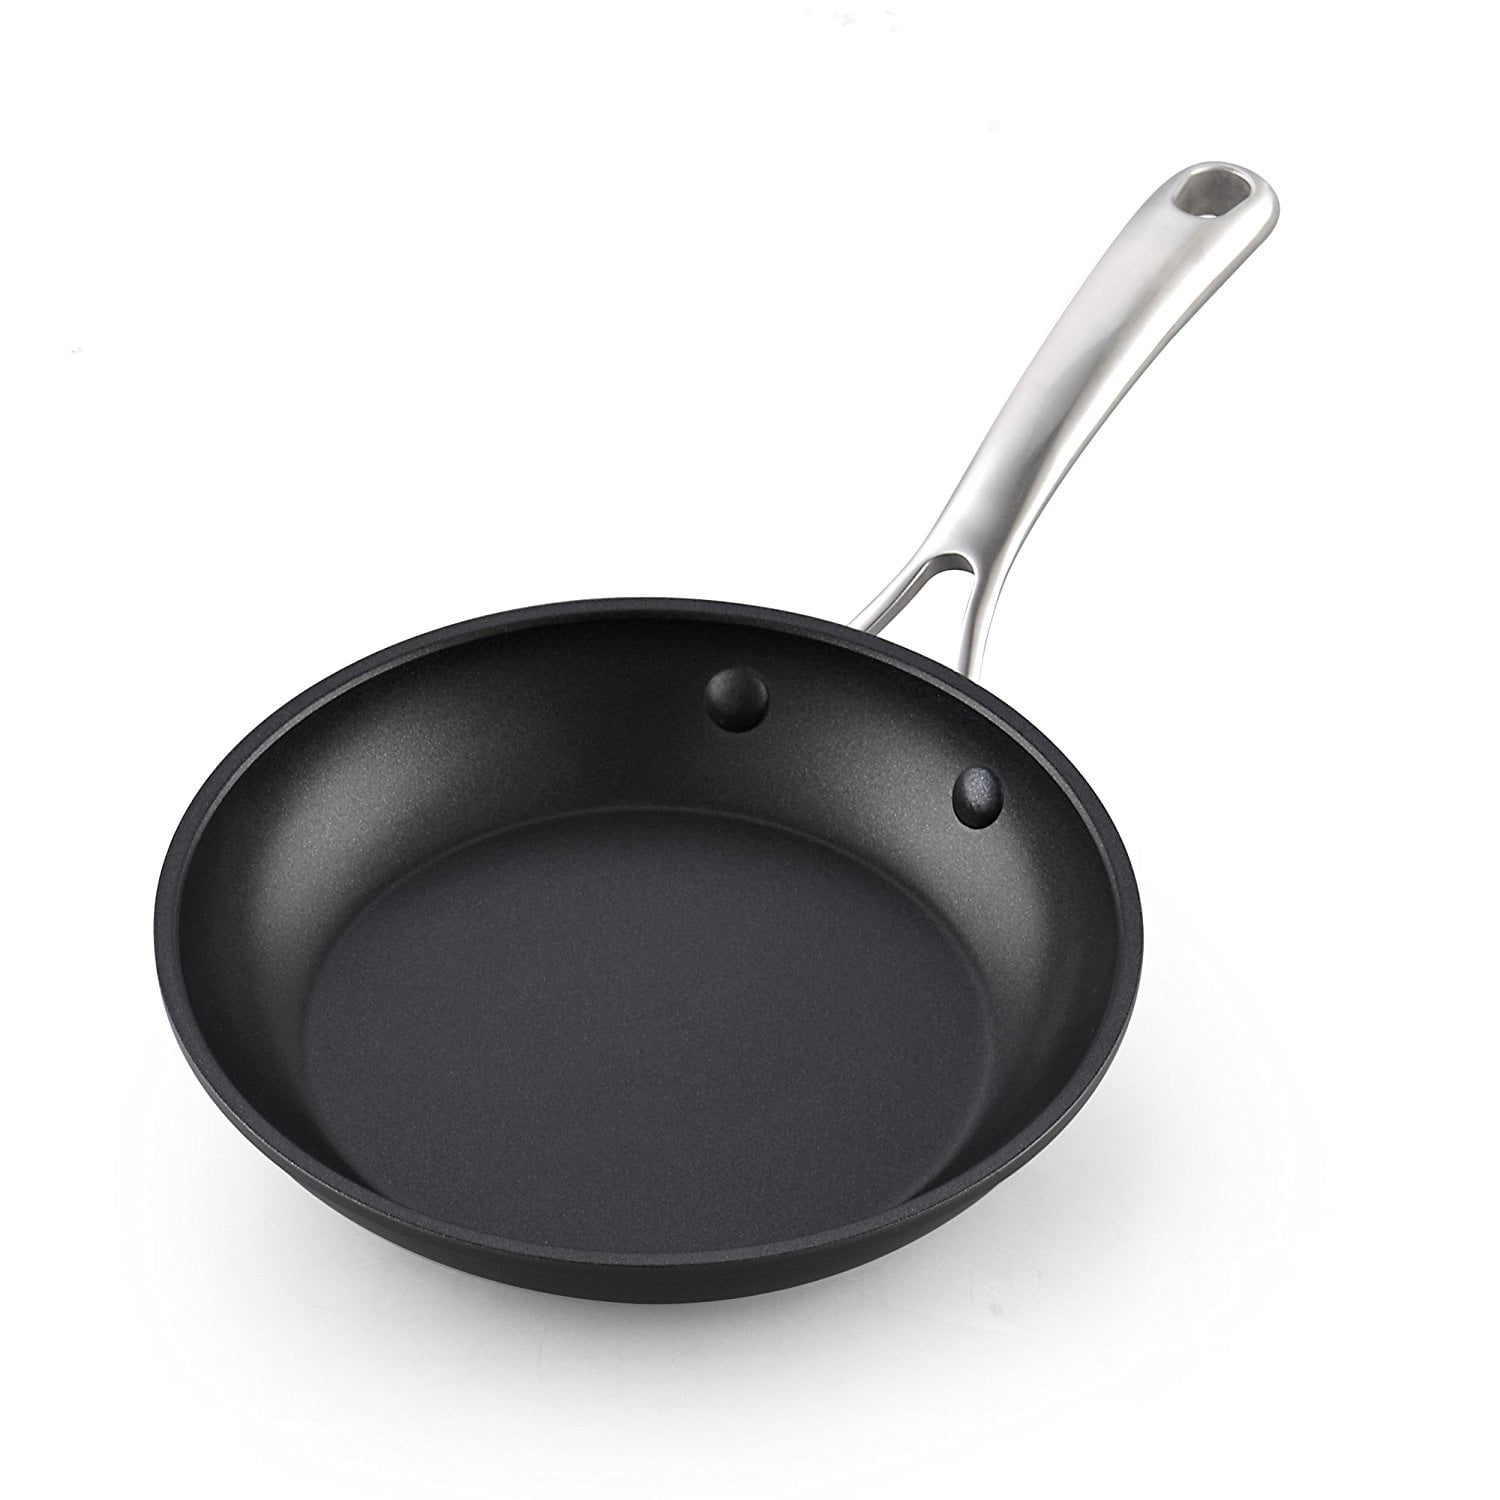 Zuhne Nonstick Cookware, Omlette Fry Pan, Stainless Steel, 8-inch, 10-inch,  and 12-inch Set, Black Excalibur Coating, PFOA-Free and Lead-Free